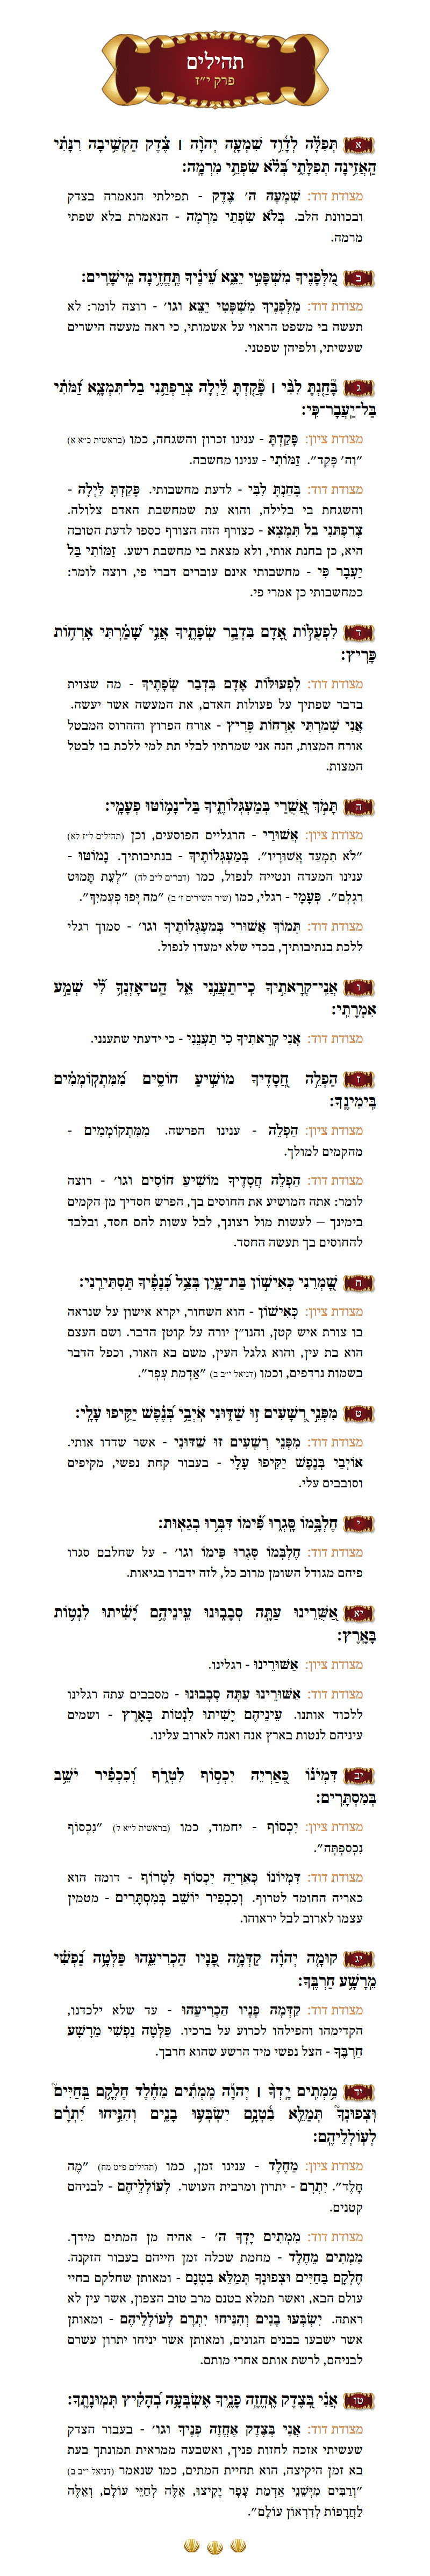 Sefer Tehillim Chapter 71 with commentary